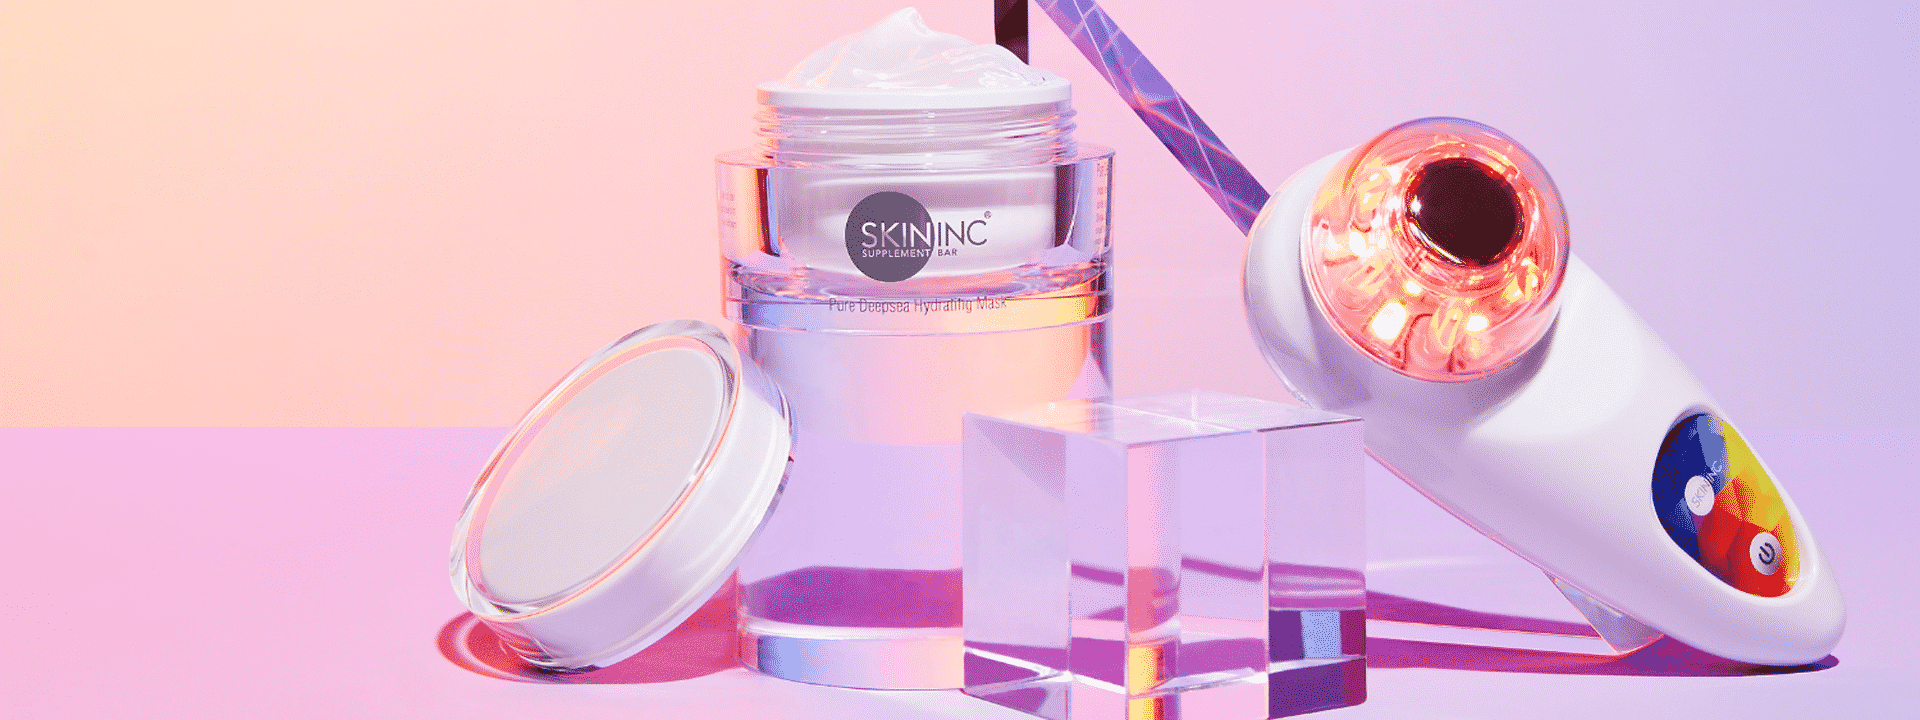 Skin Inc Product Banner 2